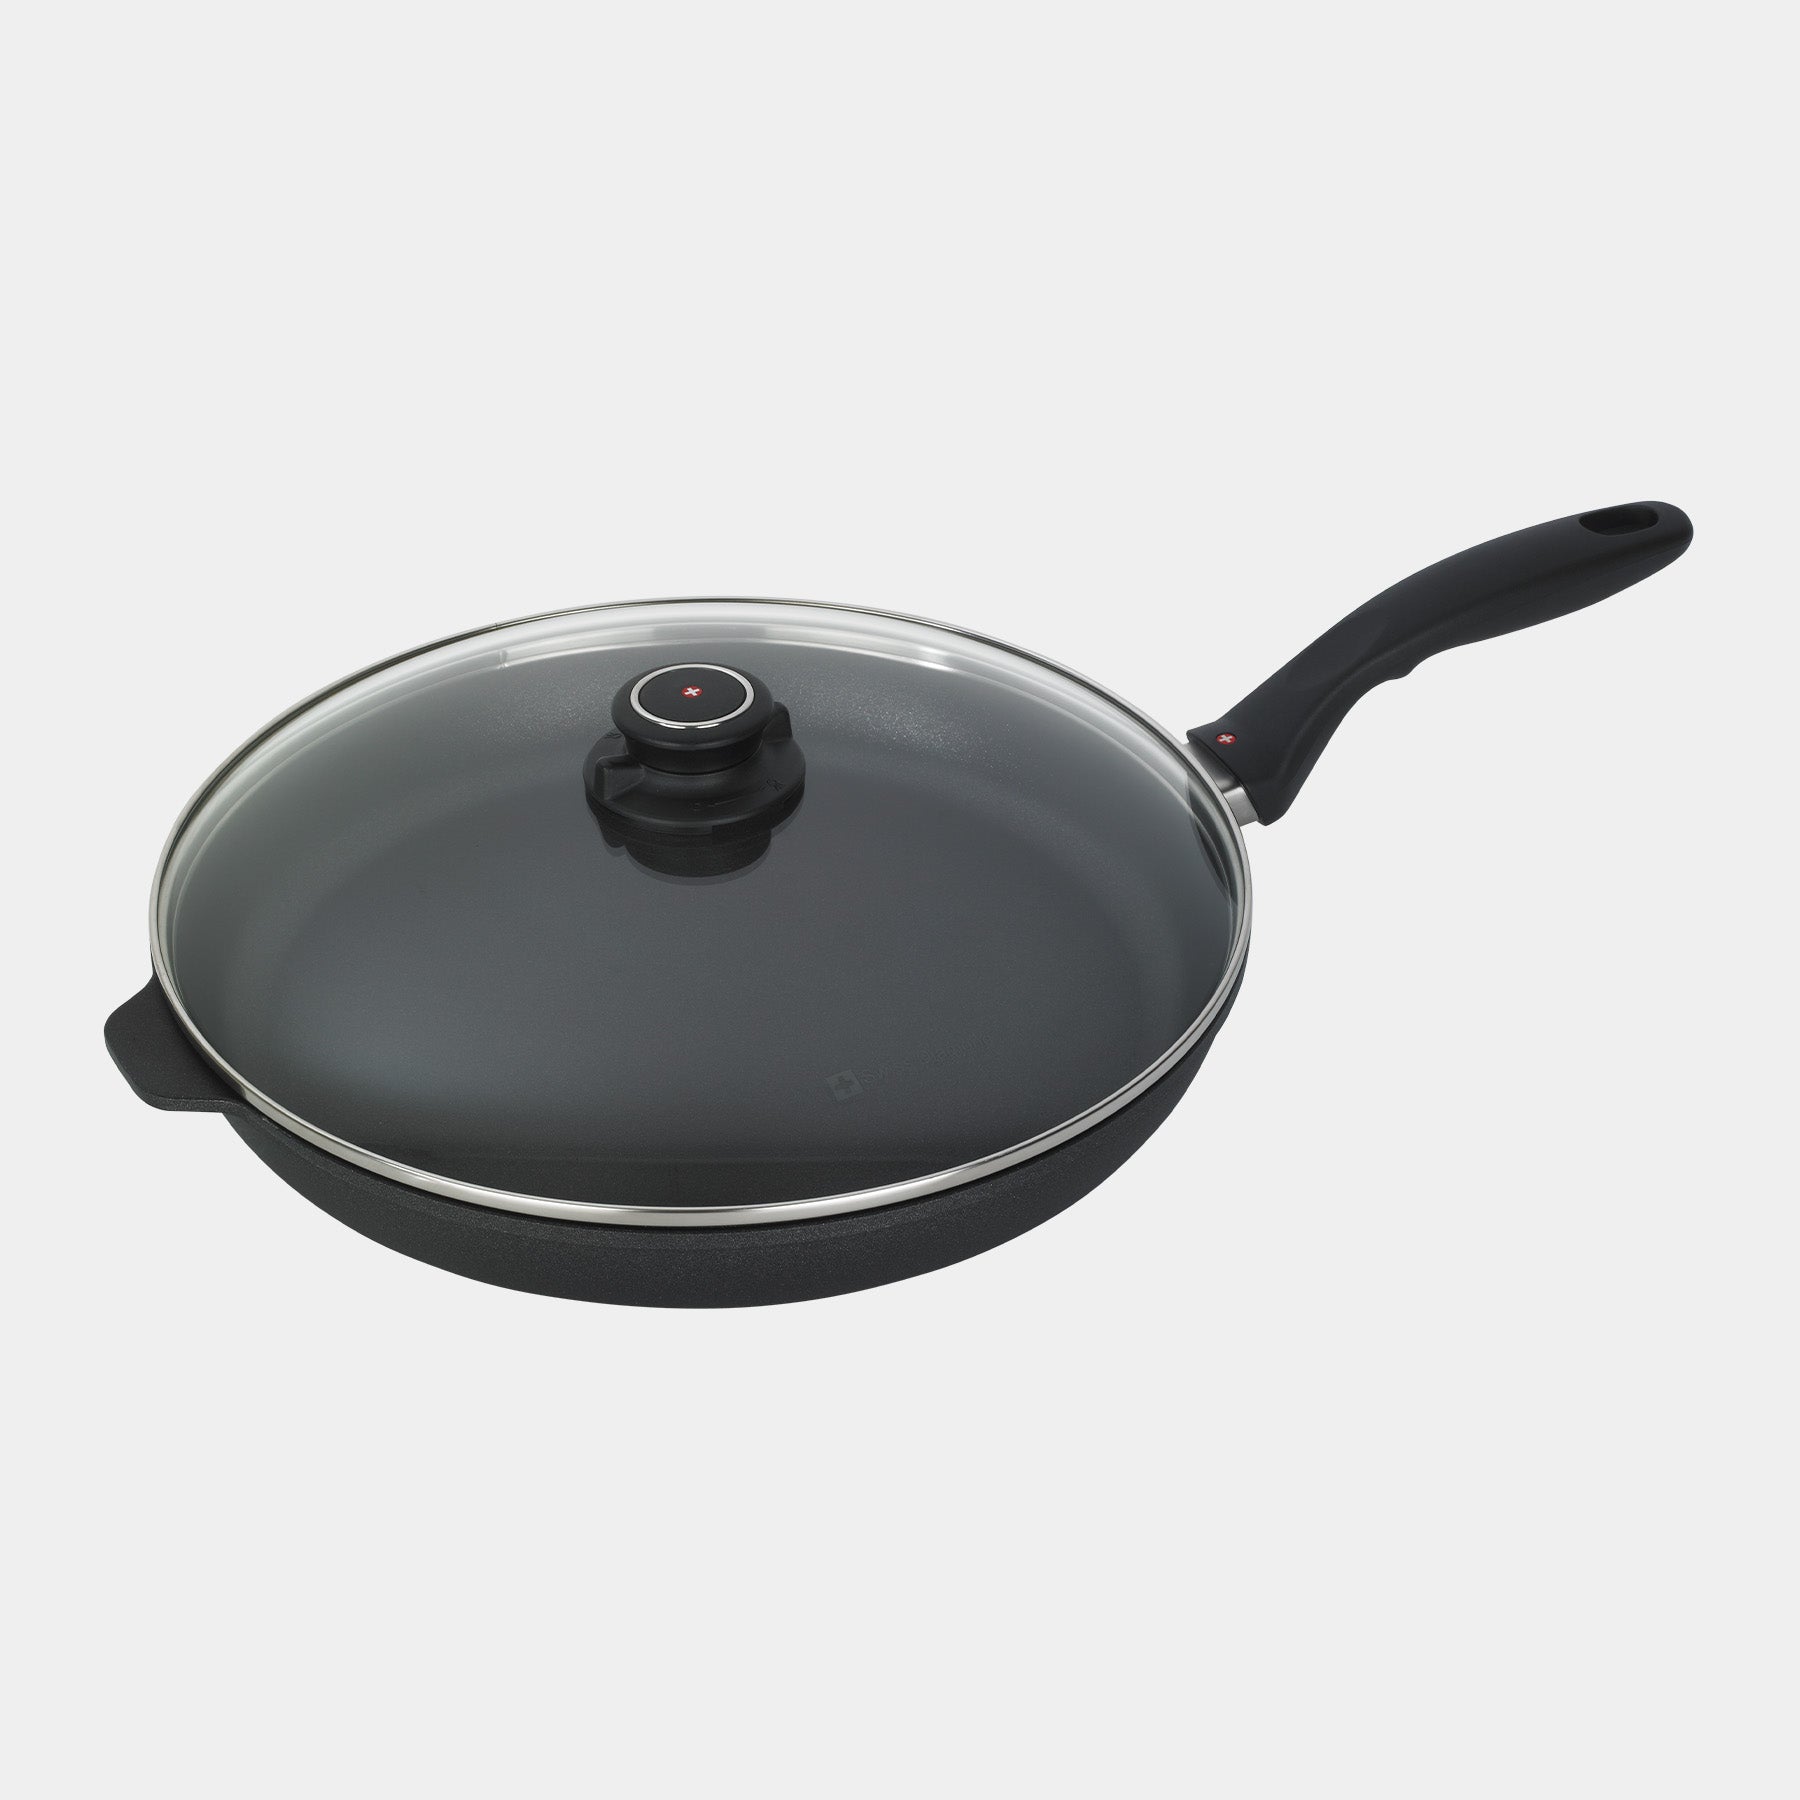 XD Nonstick 12.5" Fry Pan with glass lid - Induction top view